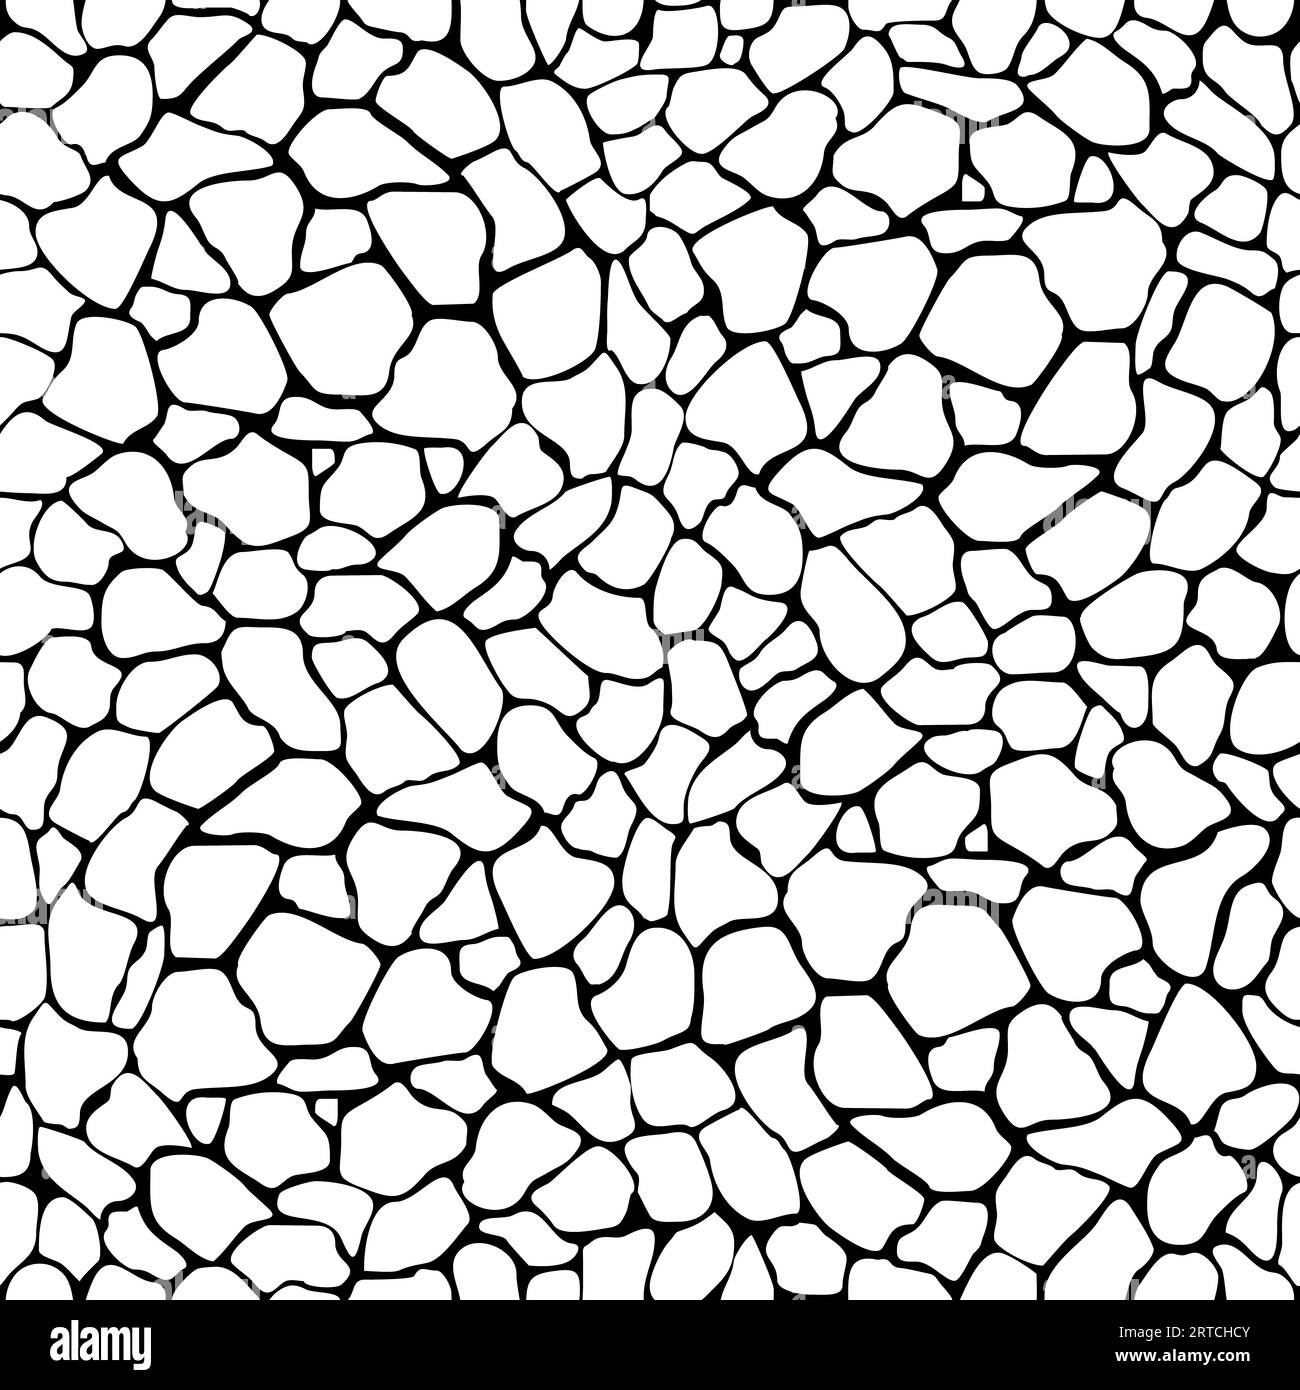 Seamless pattern with organic abstract motifs in black and white Stock Photo